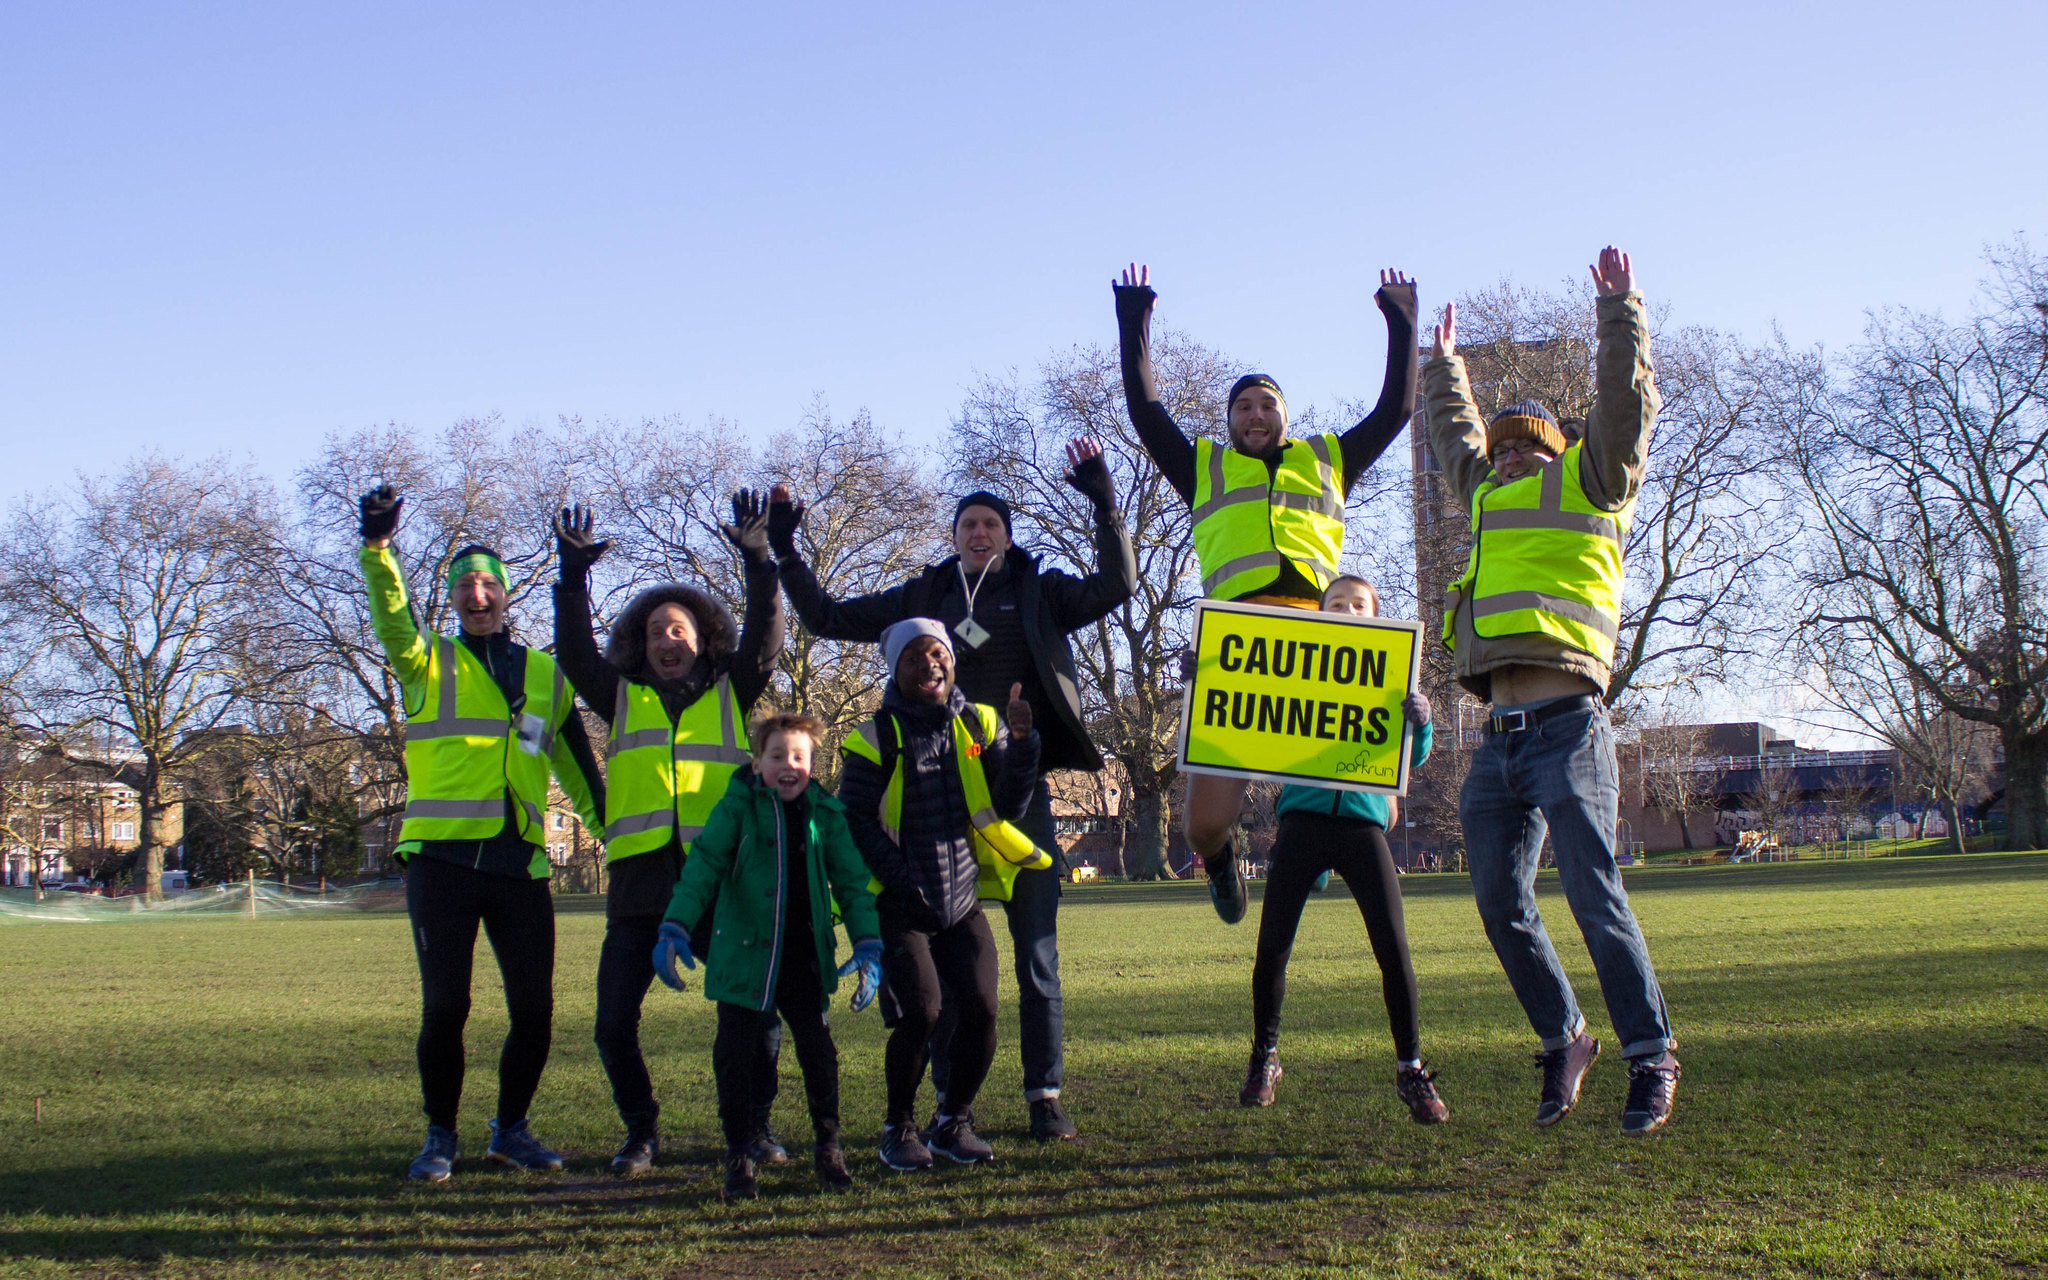 Group of volunteers in fluorescent vests jumping in the air in a park